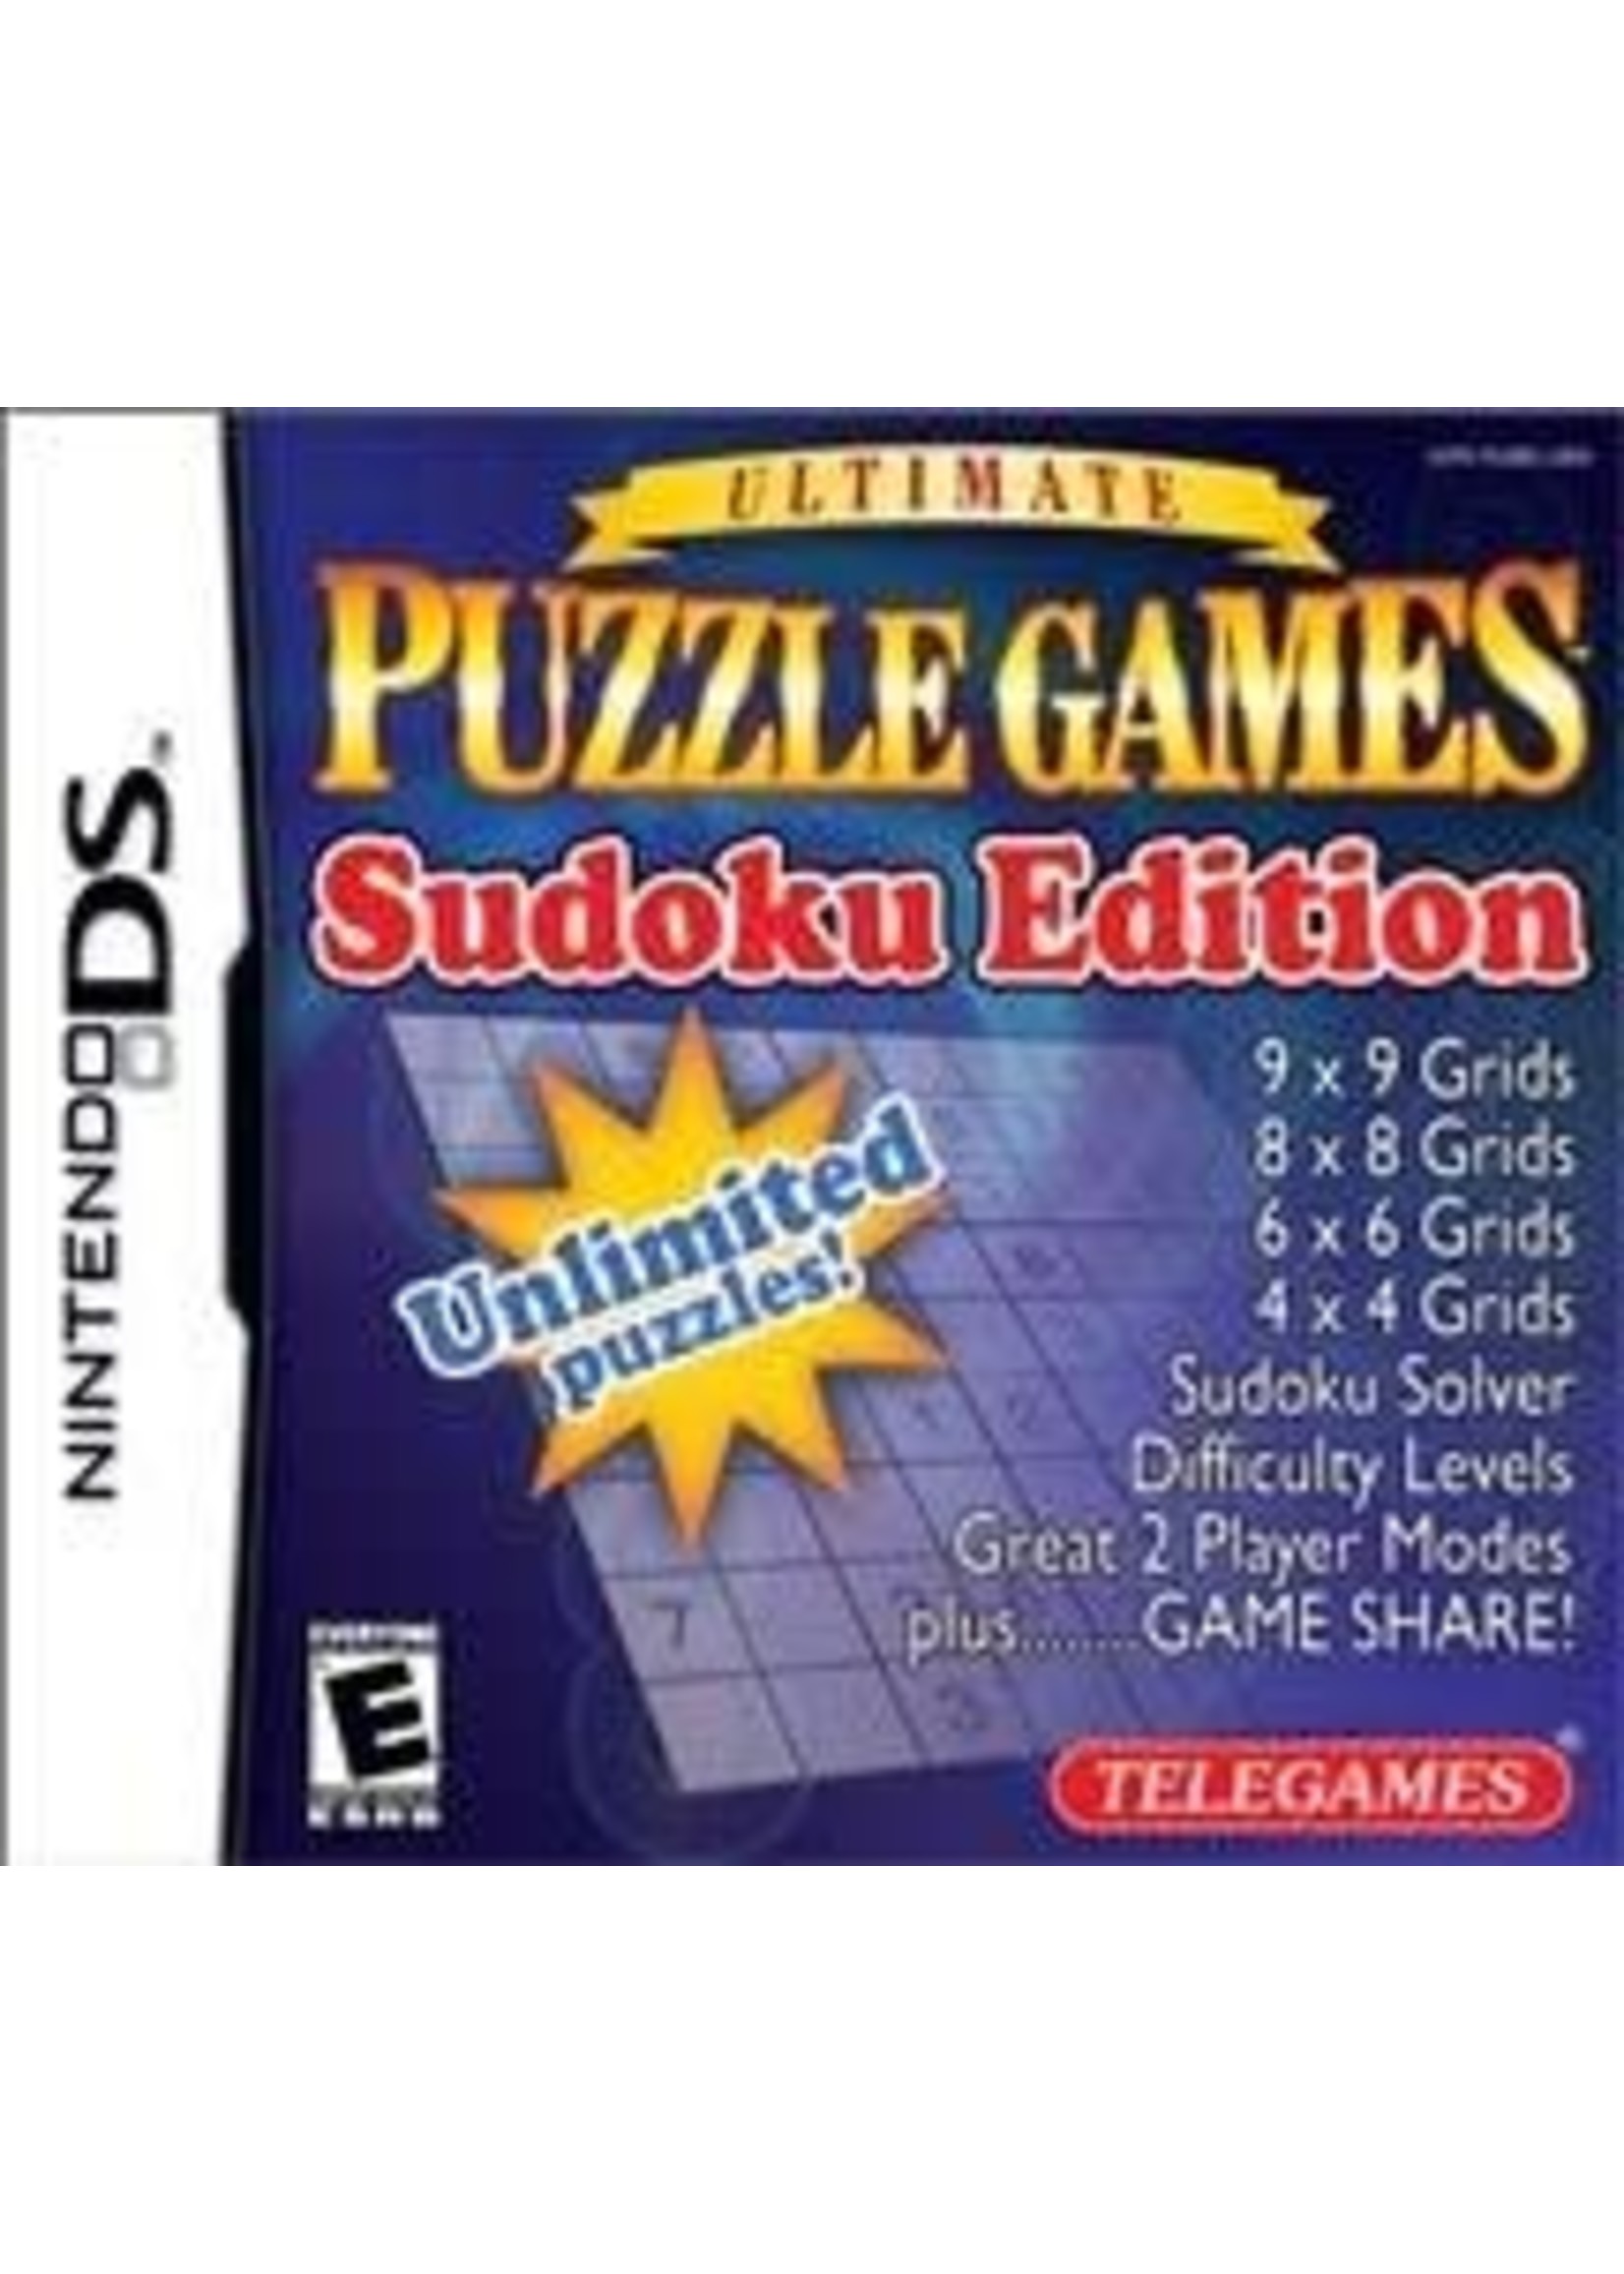 Sodoku Puzzle Games - NDS NEW